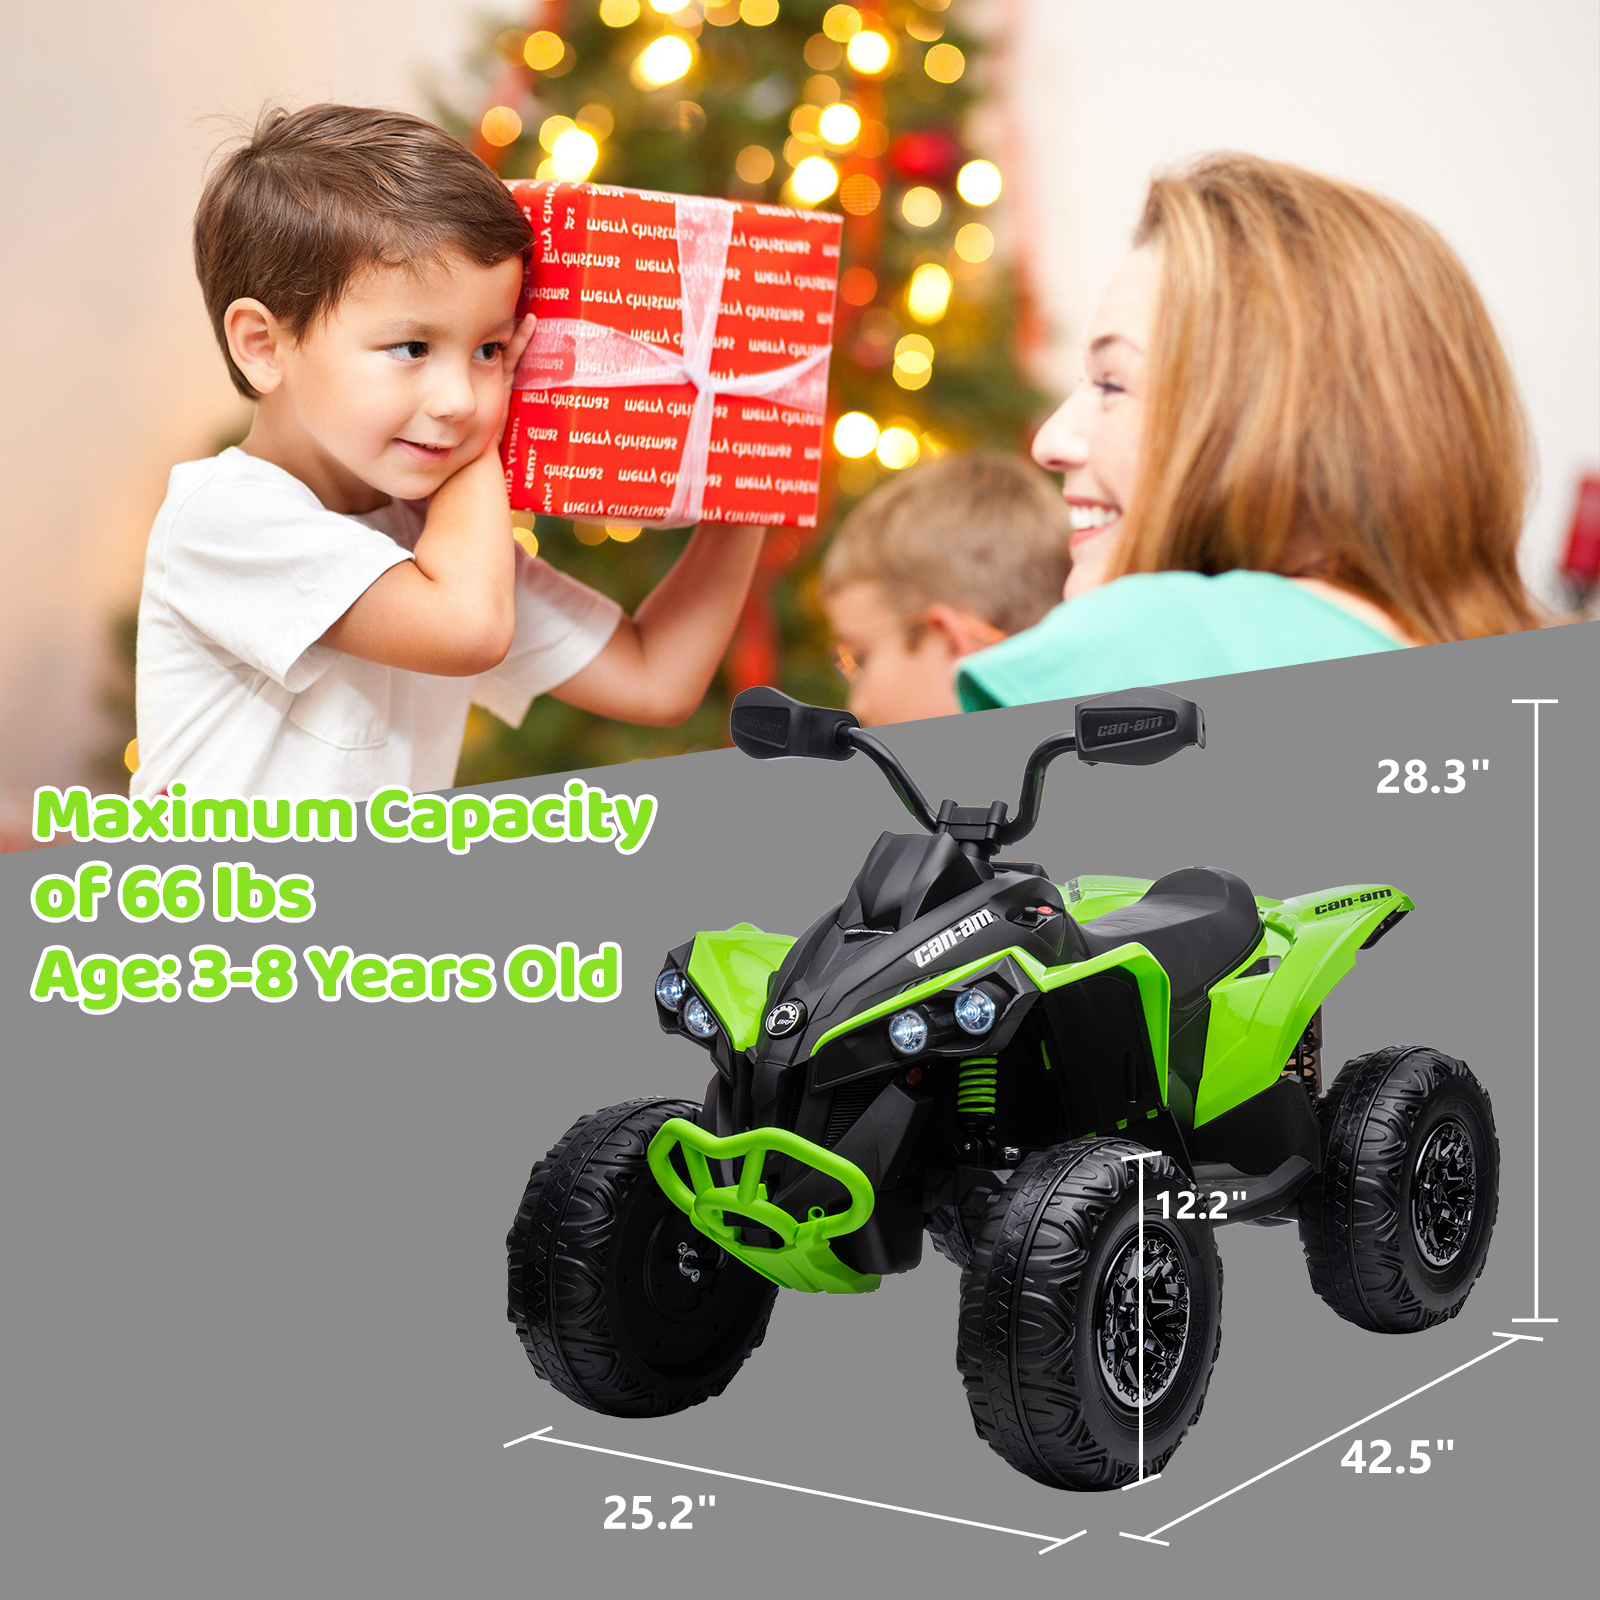 12V Ride on Toy Car Bombardier Licensed DK CA002 12V7AH 2*35W motors ATV Electric Vehicle Best Children's Day Gifts for 3-8 Year Old Boys Girls, Green - image 5 of 7